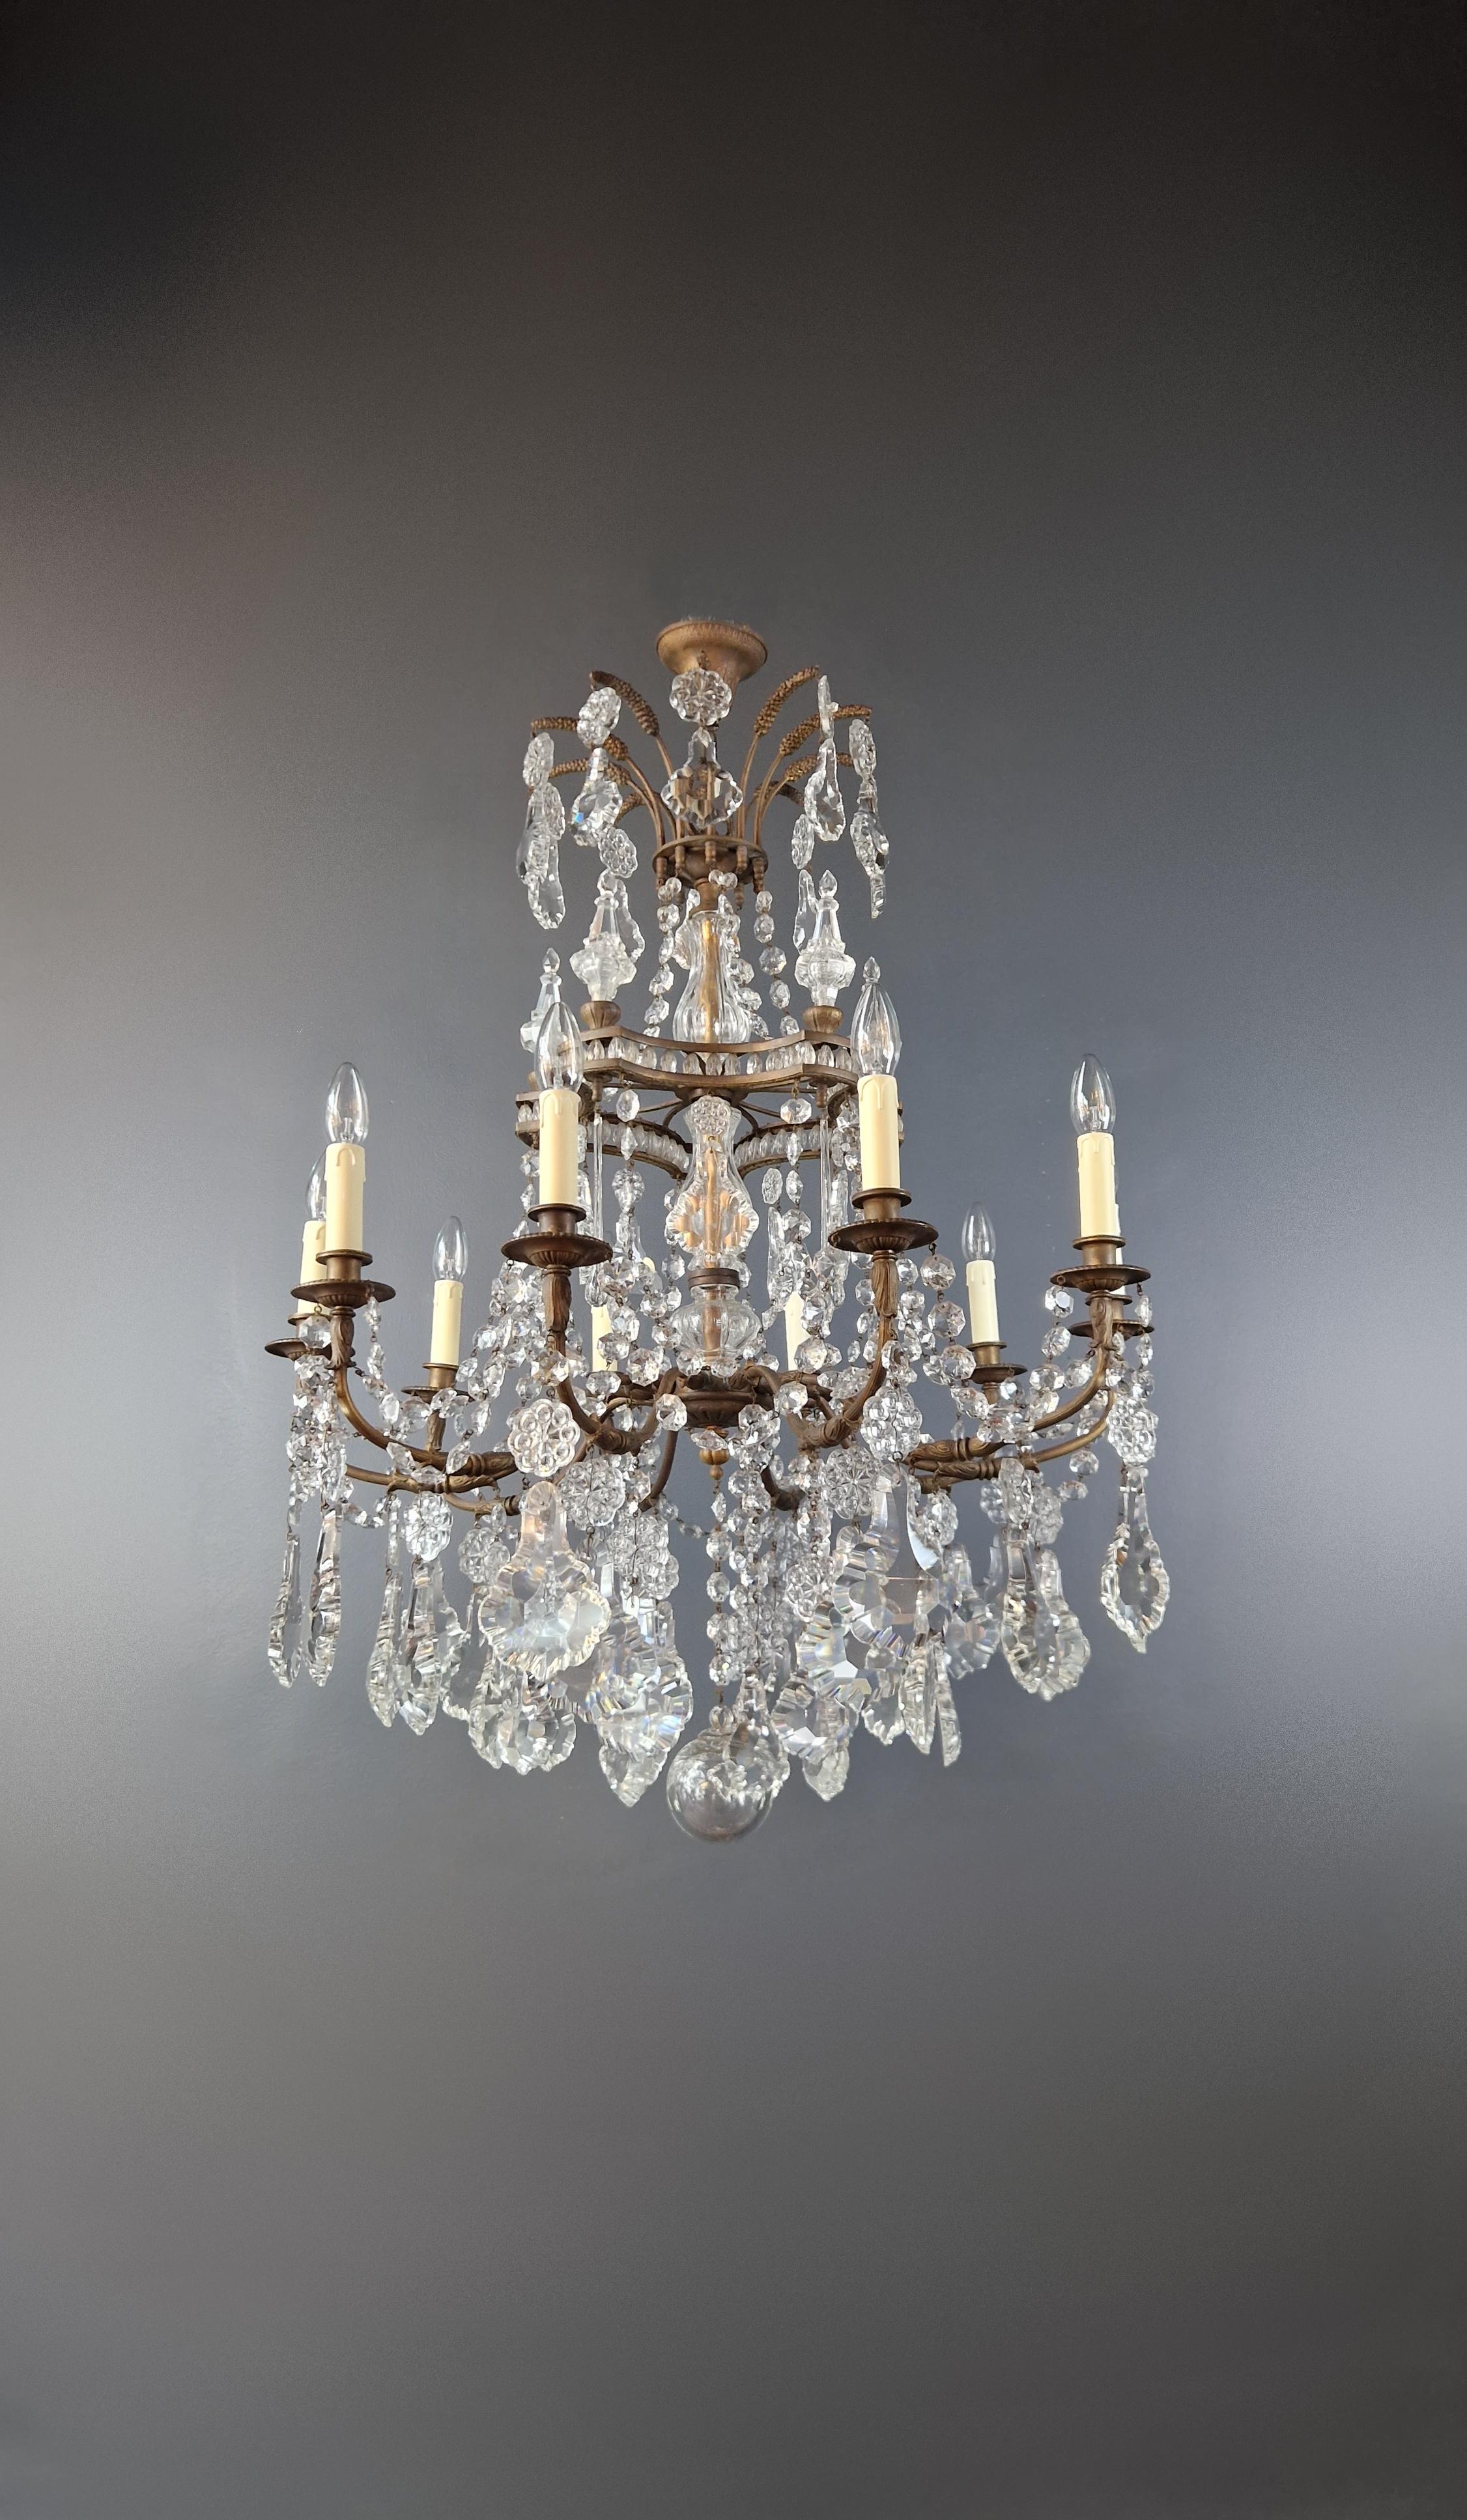 Baroque Art Nouveau Crystal Chandelier Brass Large Crystals Traditional Antique Ceiling